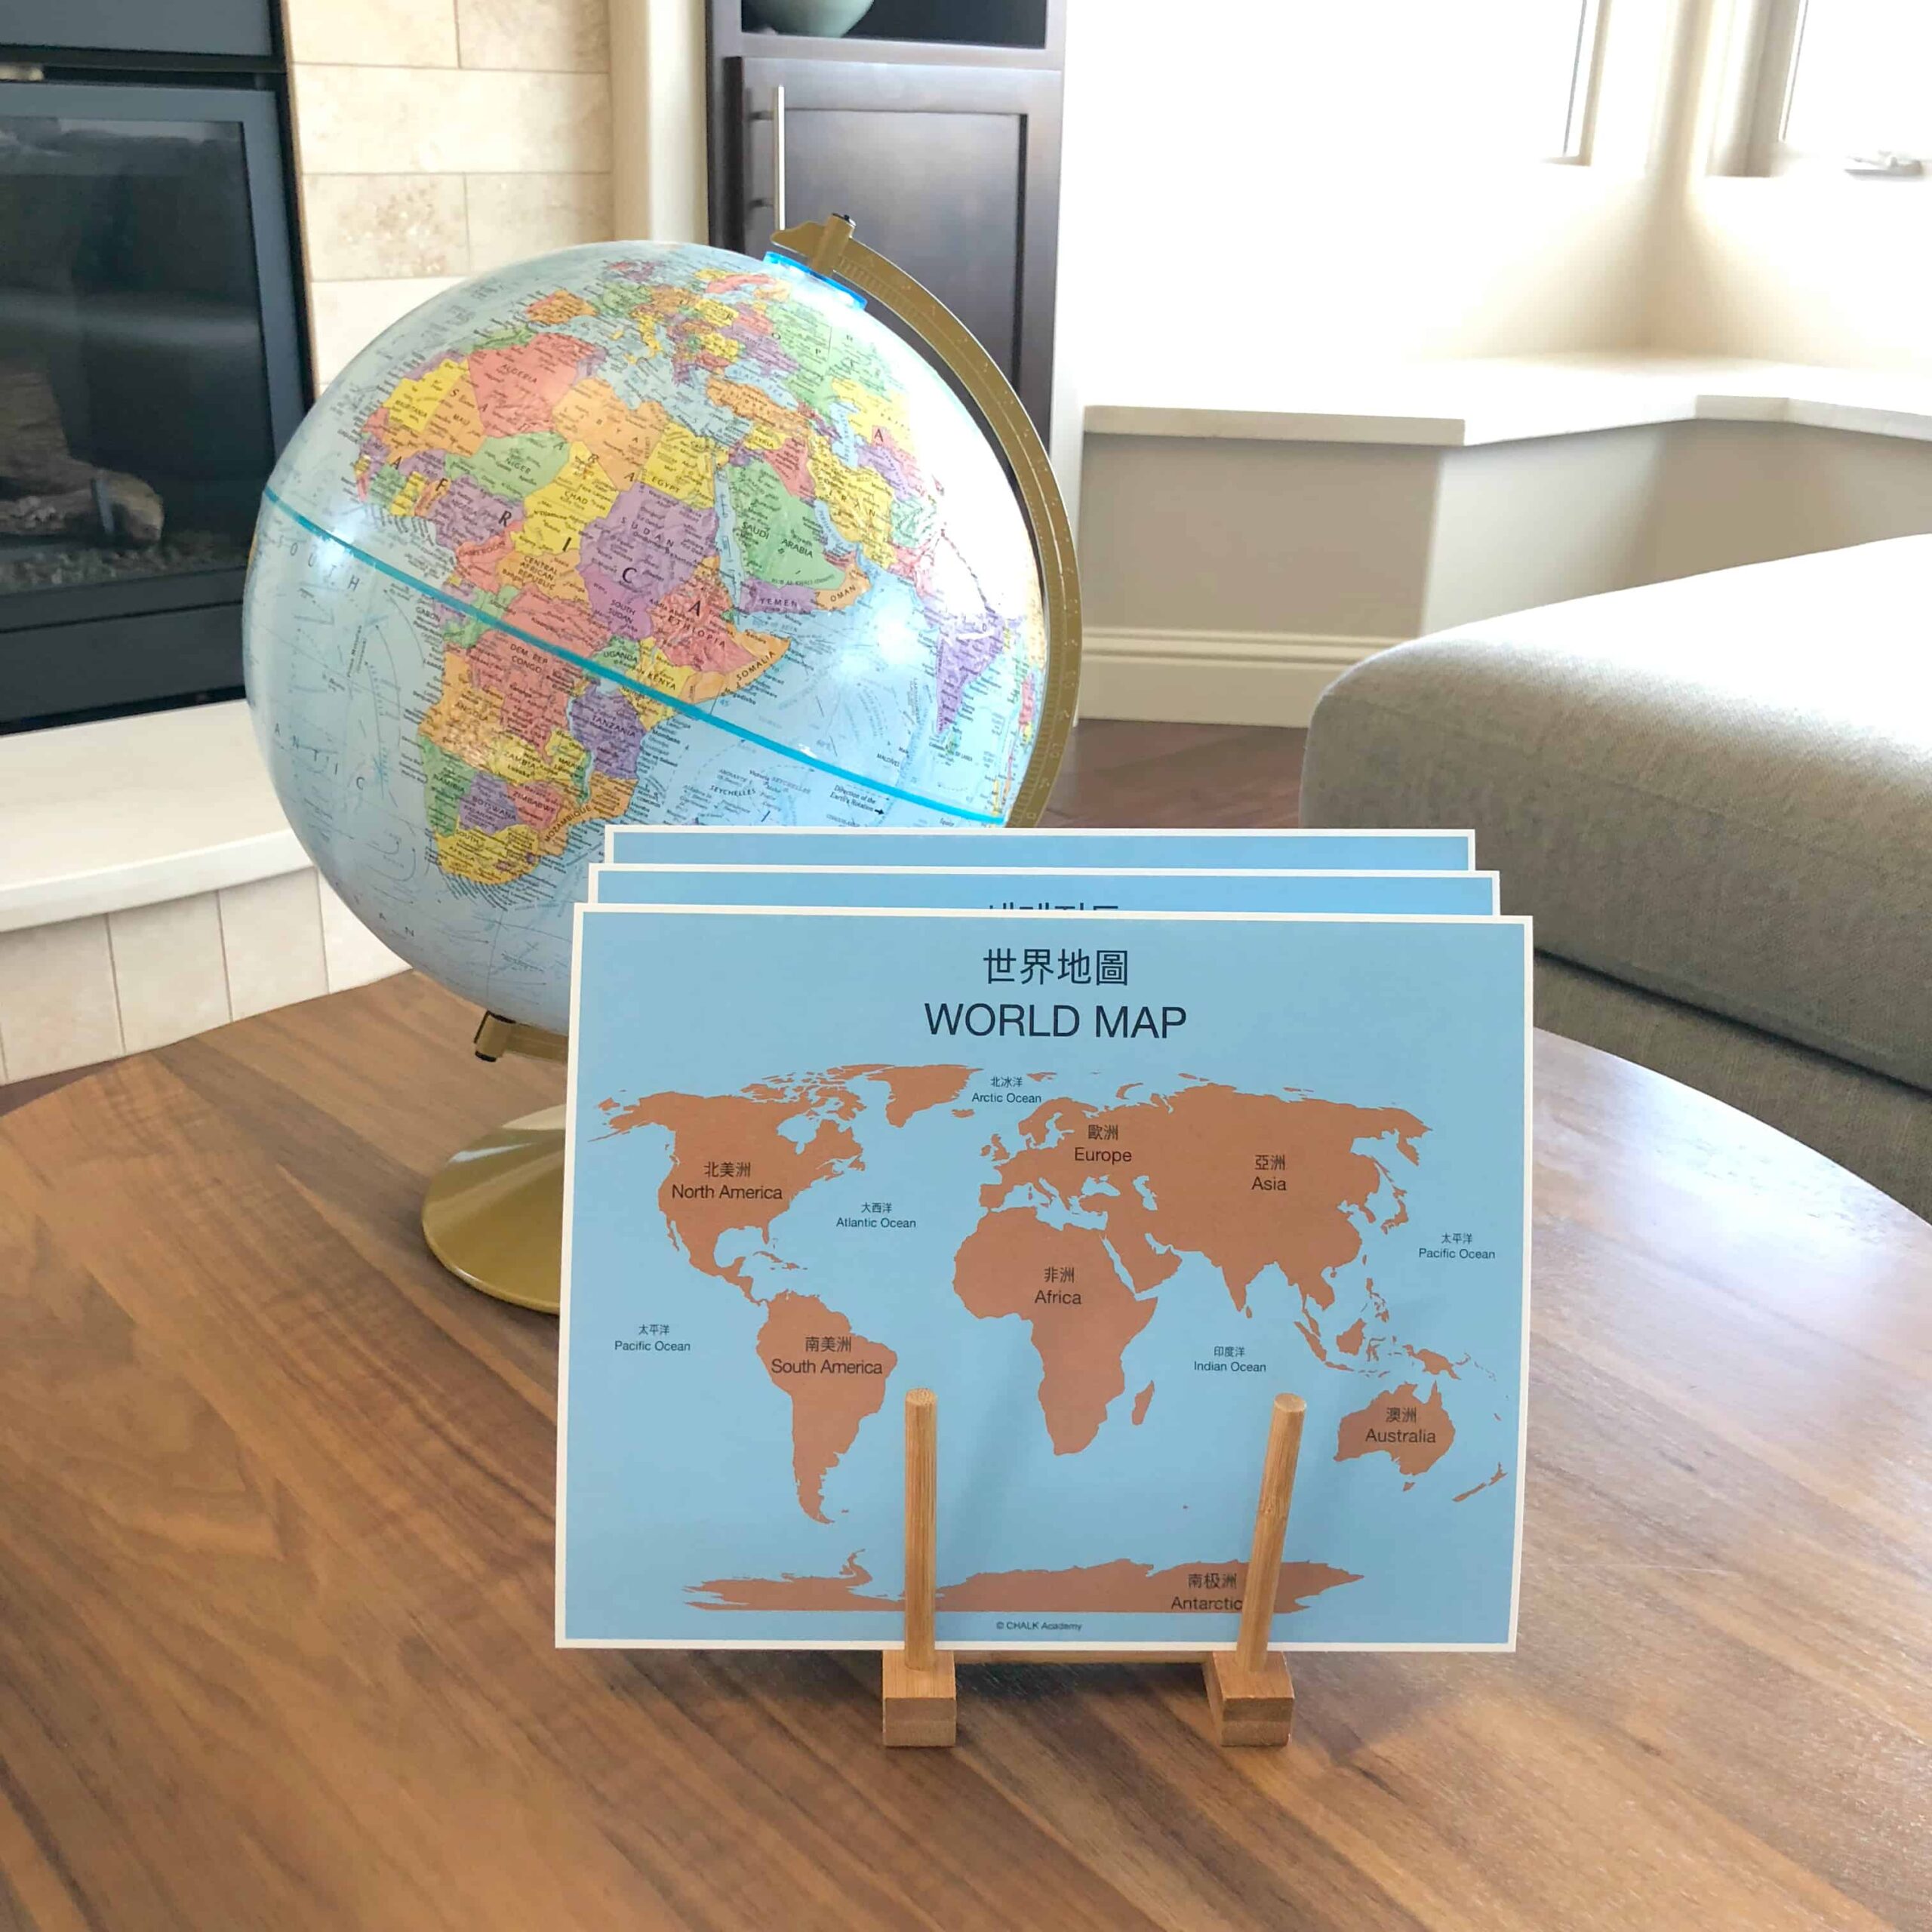 All About Montessori Geography Maps, Books, Activities (English, Chinese, Korean)